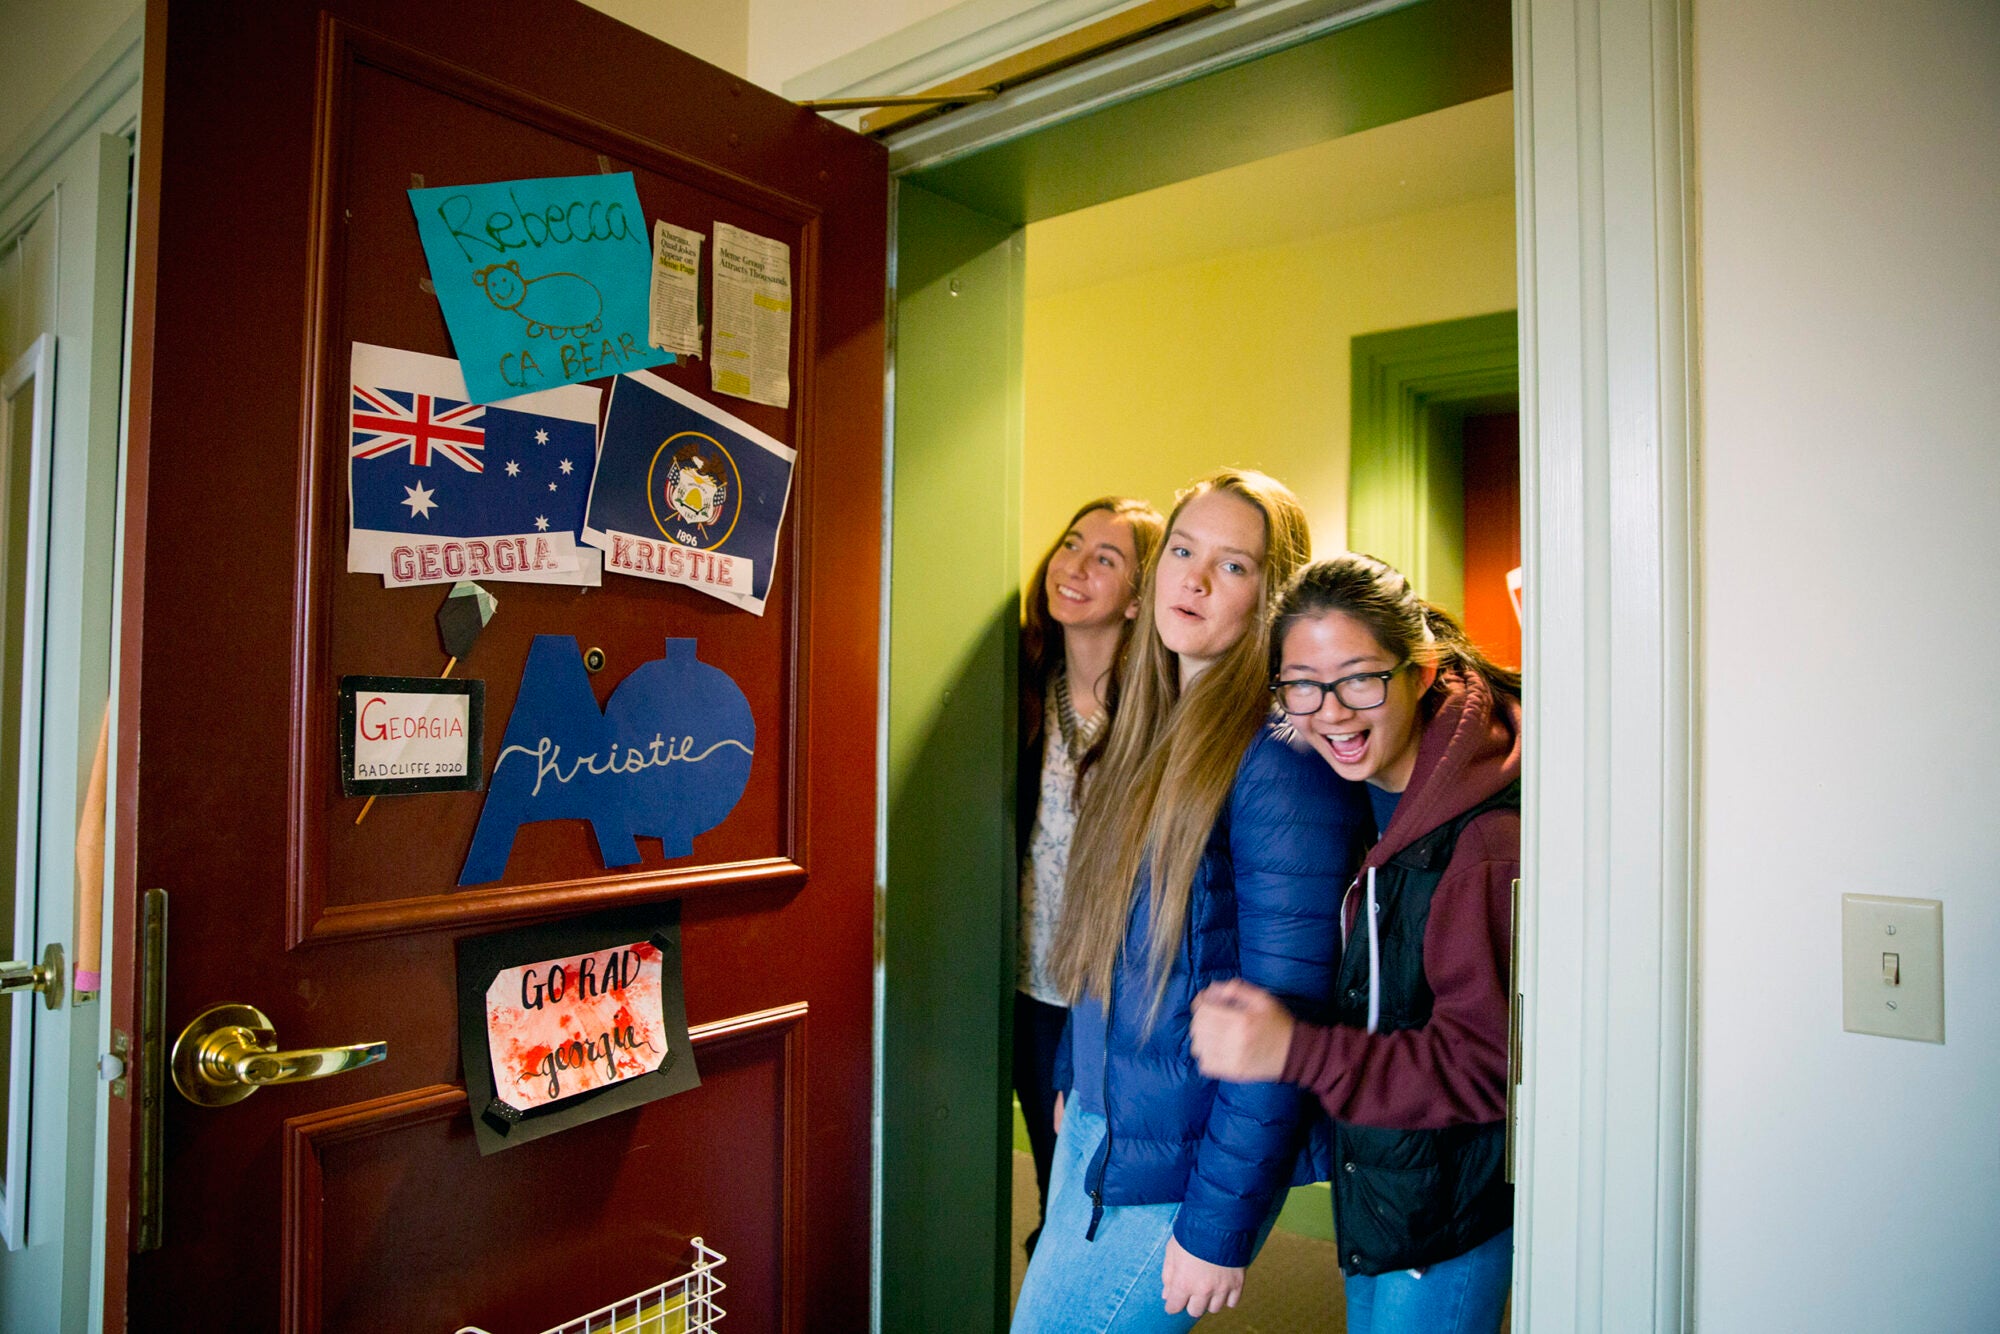 Three young women roommates stand in the doorway of a dorm room